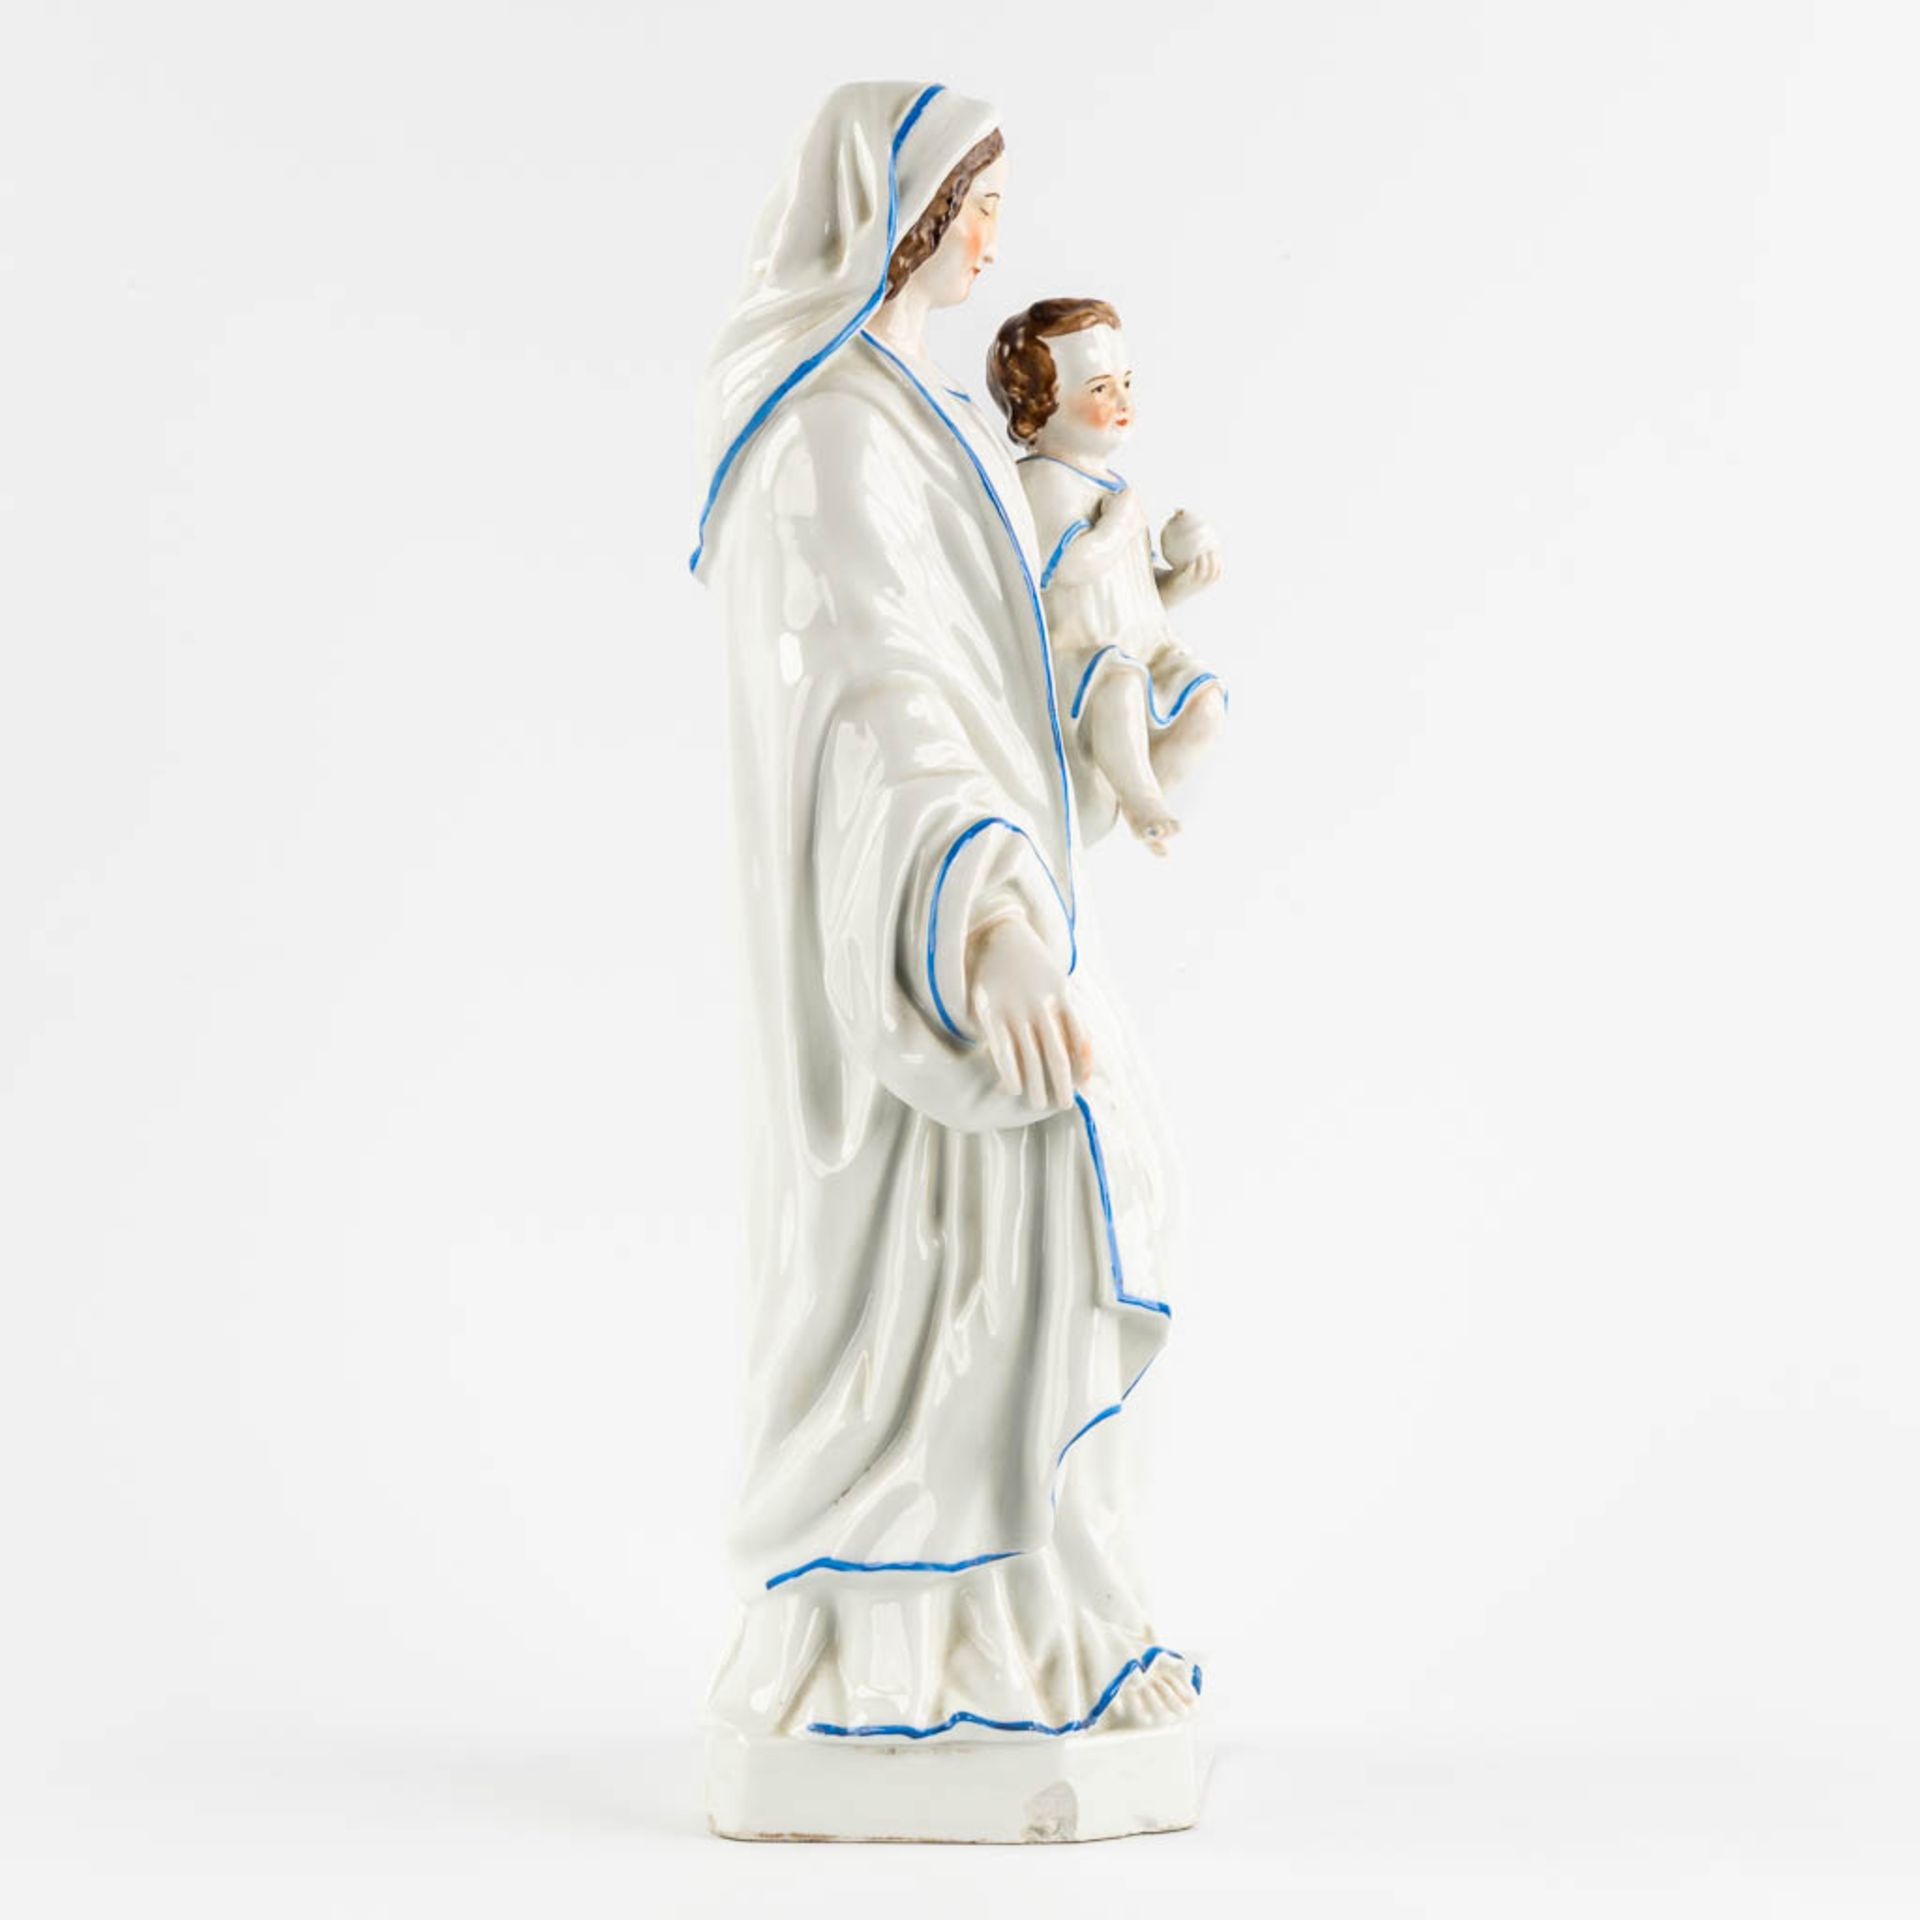 A large figurine of 'Madonna with a child' polychrome porcelain. 19th C. (L:17 x W:21 x H:52 cm) - Image 4 of 11